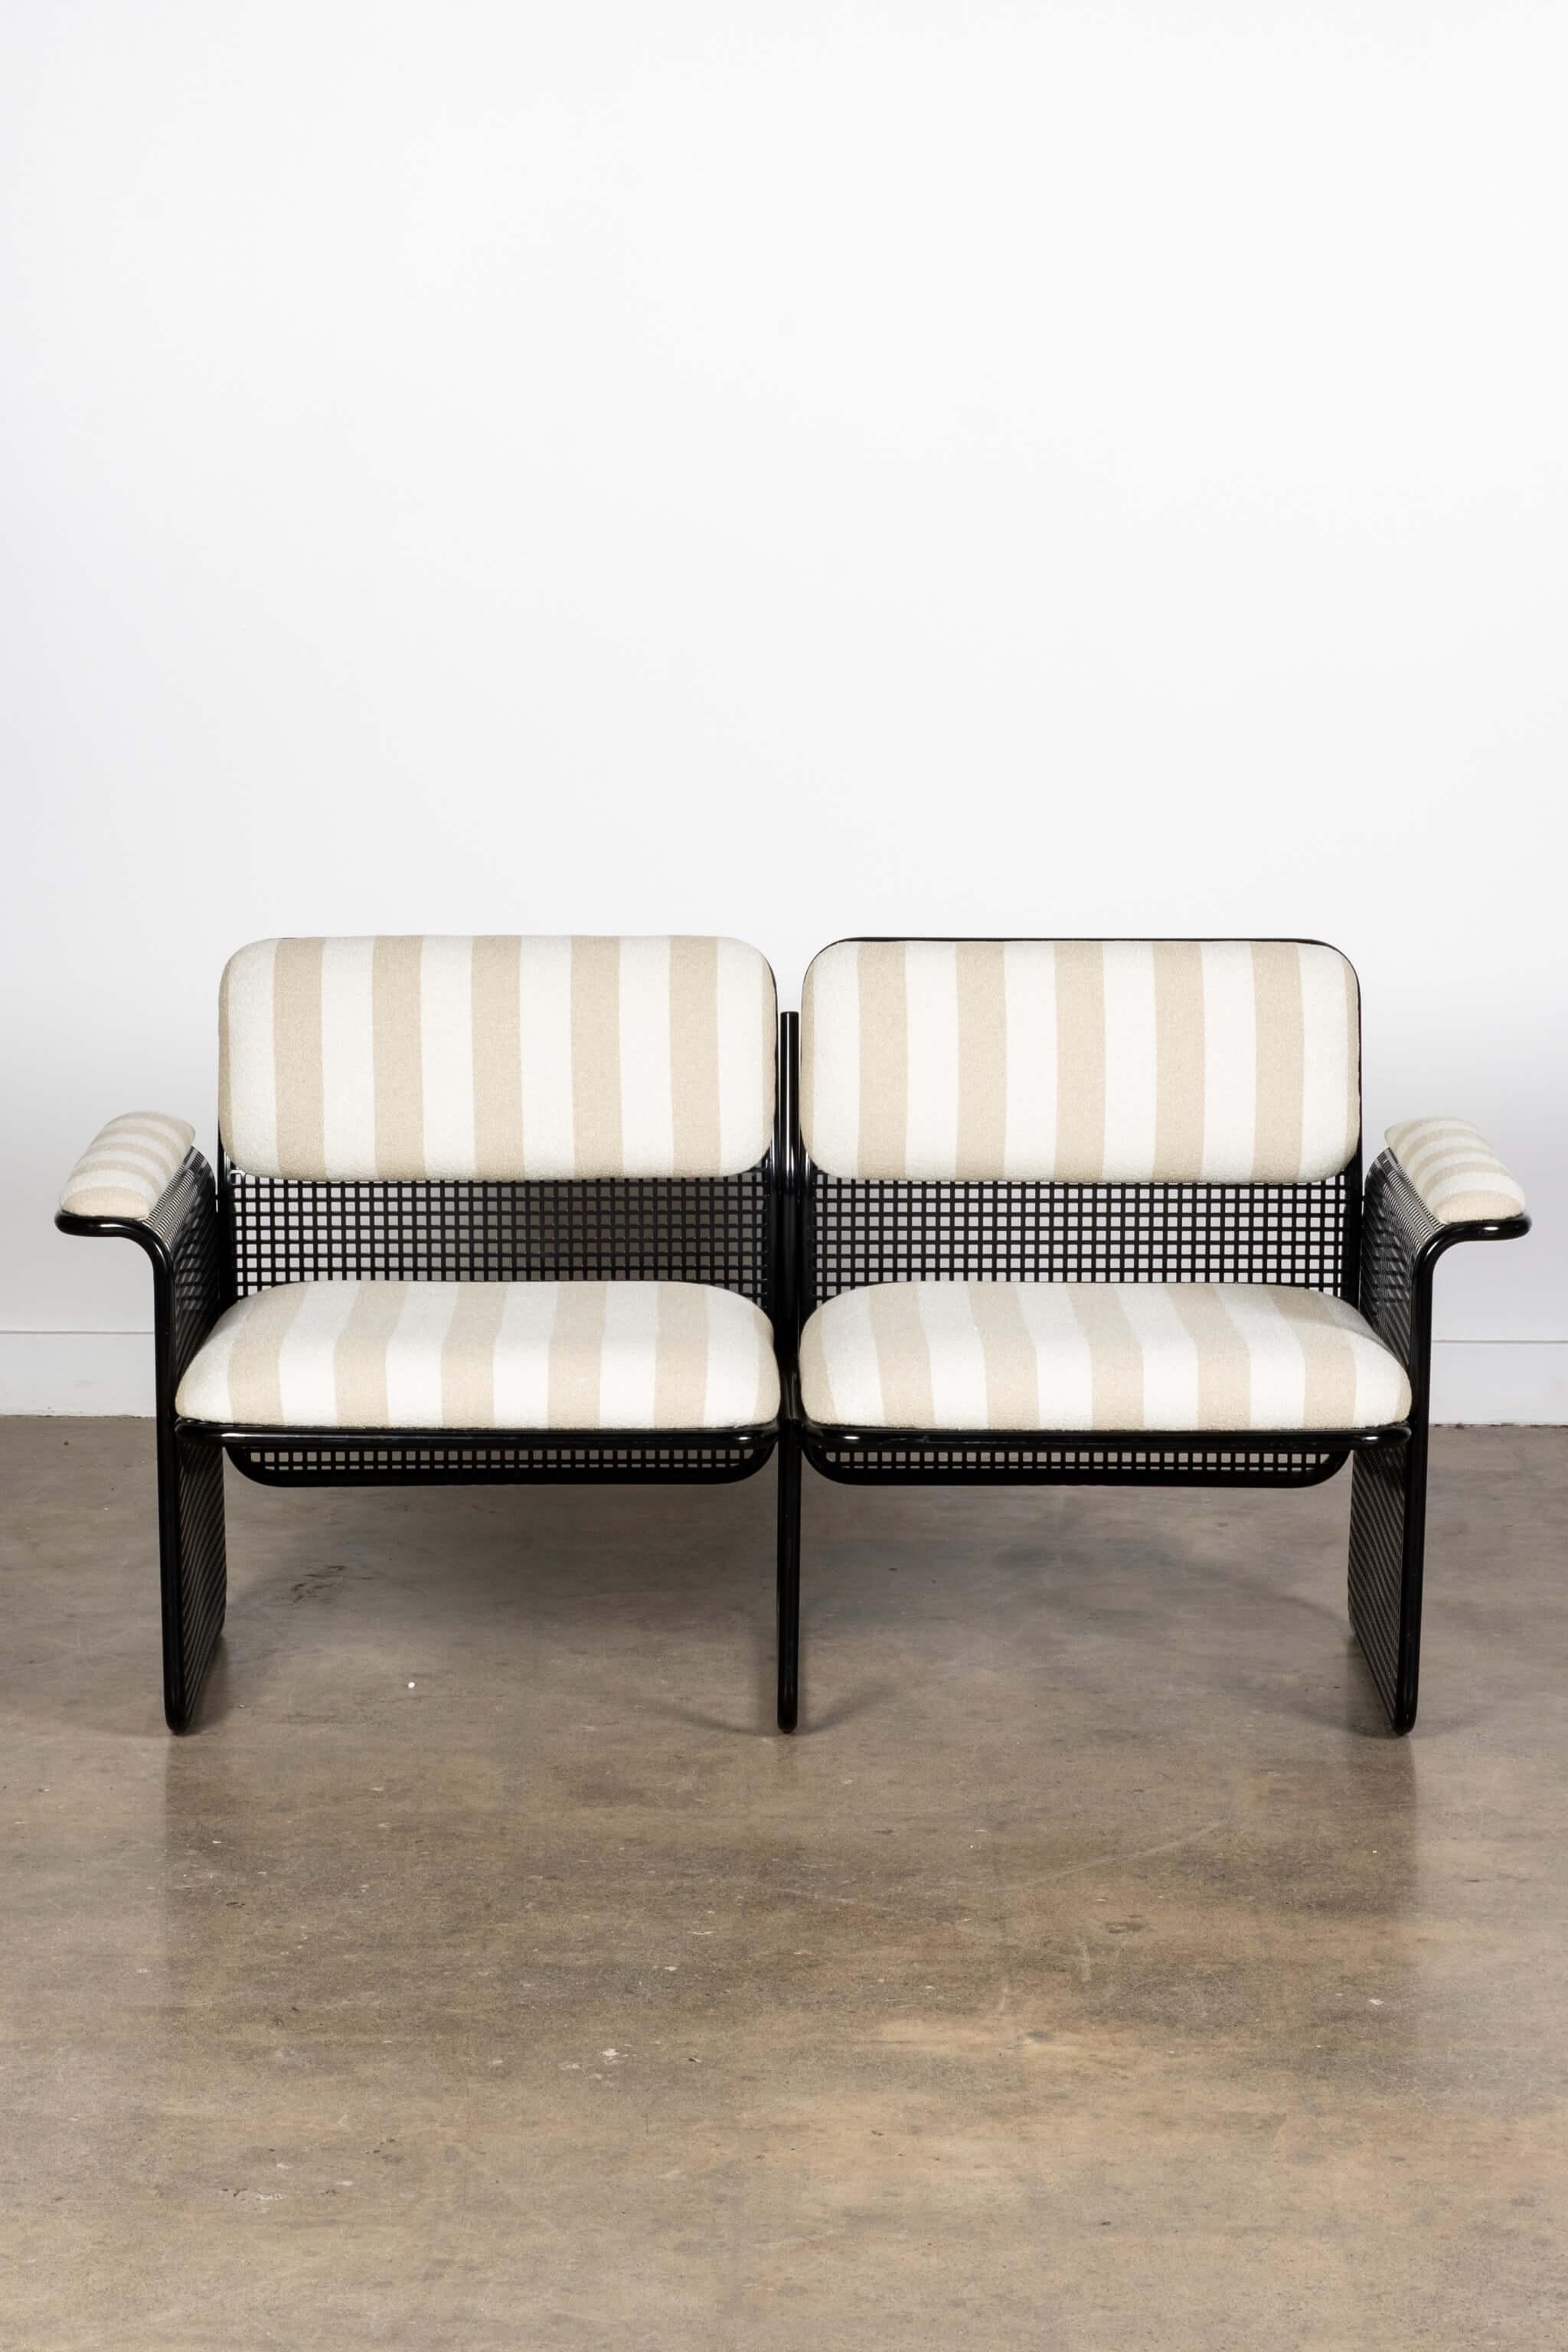 Post-Modern 1970s Italian Solarium 3 Piece Set, Newly Upholstered For Sale